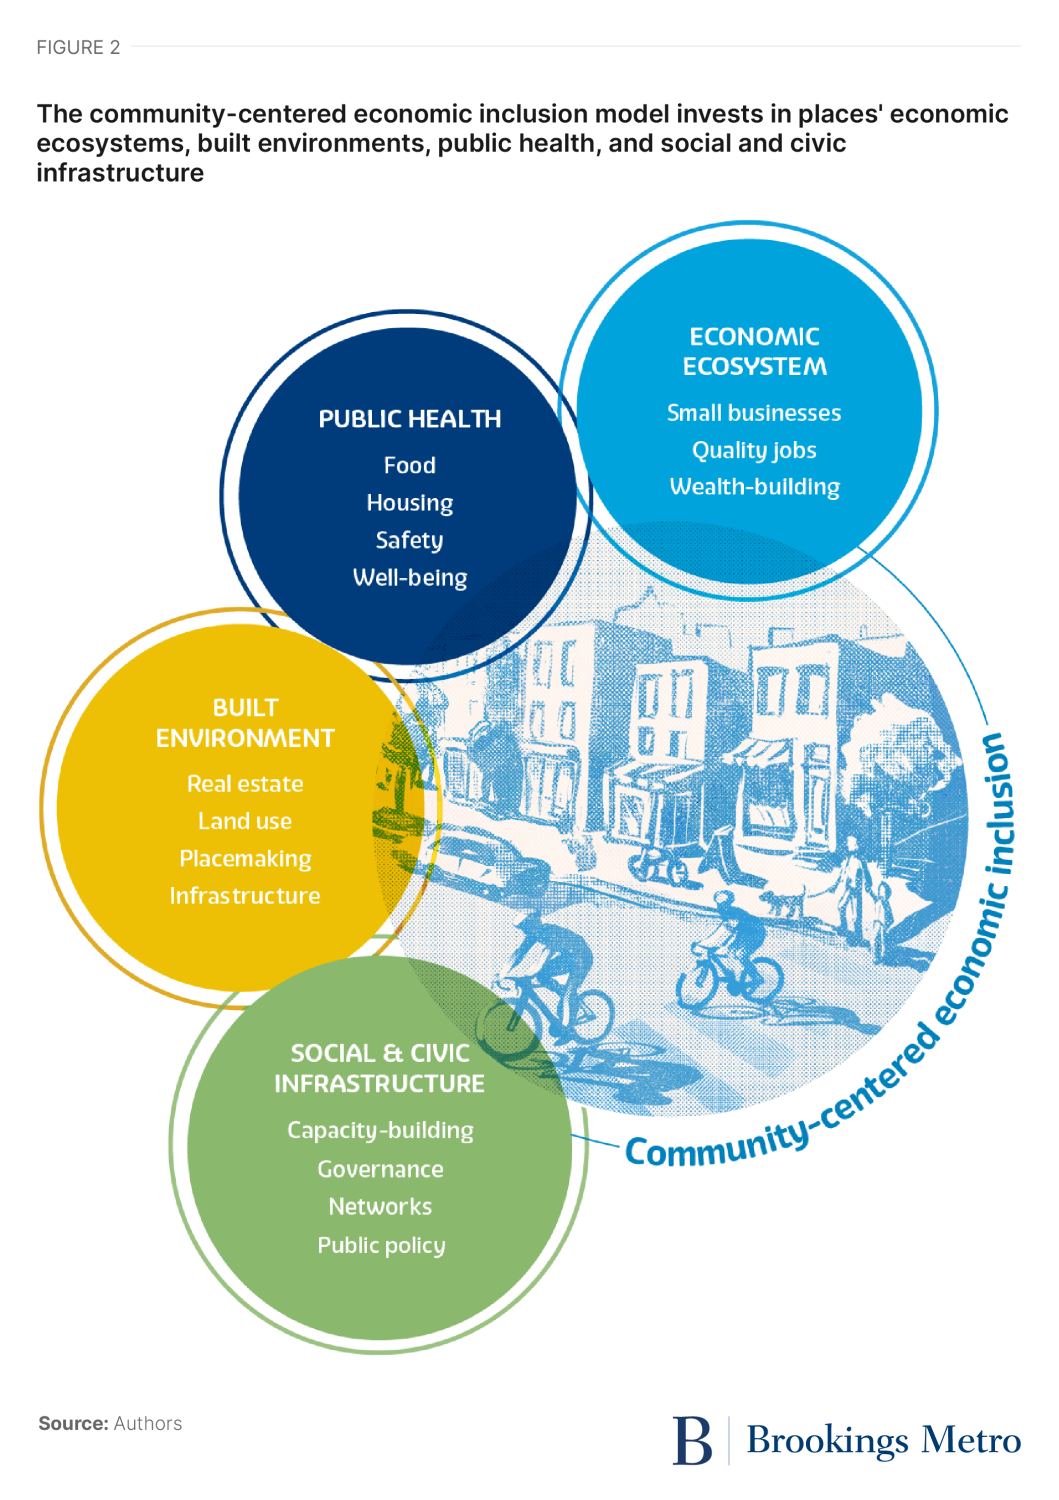 Figure 2. The community-centered economic inclusion model invests in places' economic ecosystems, built environments, public health, and social and civic infrastructure